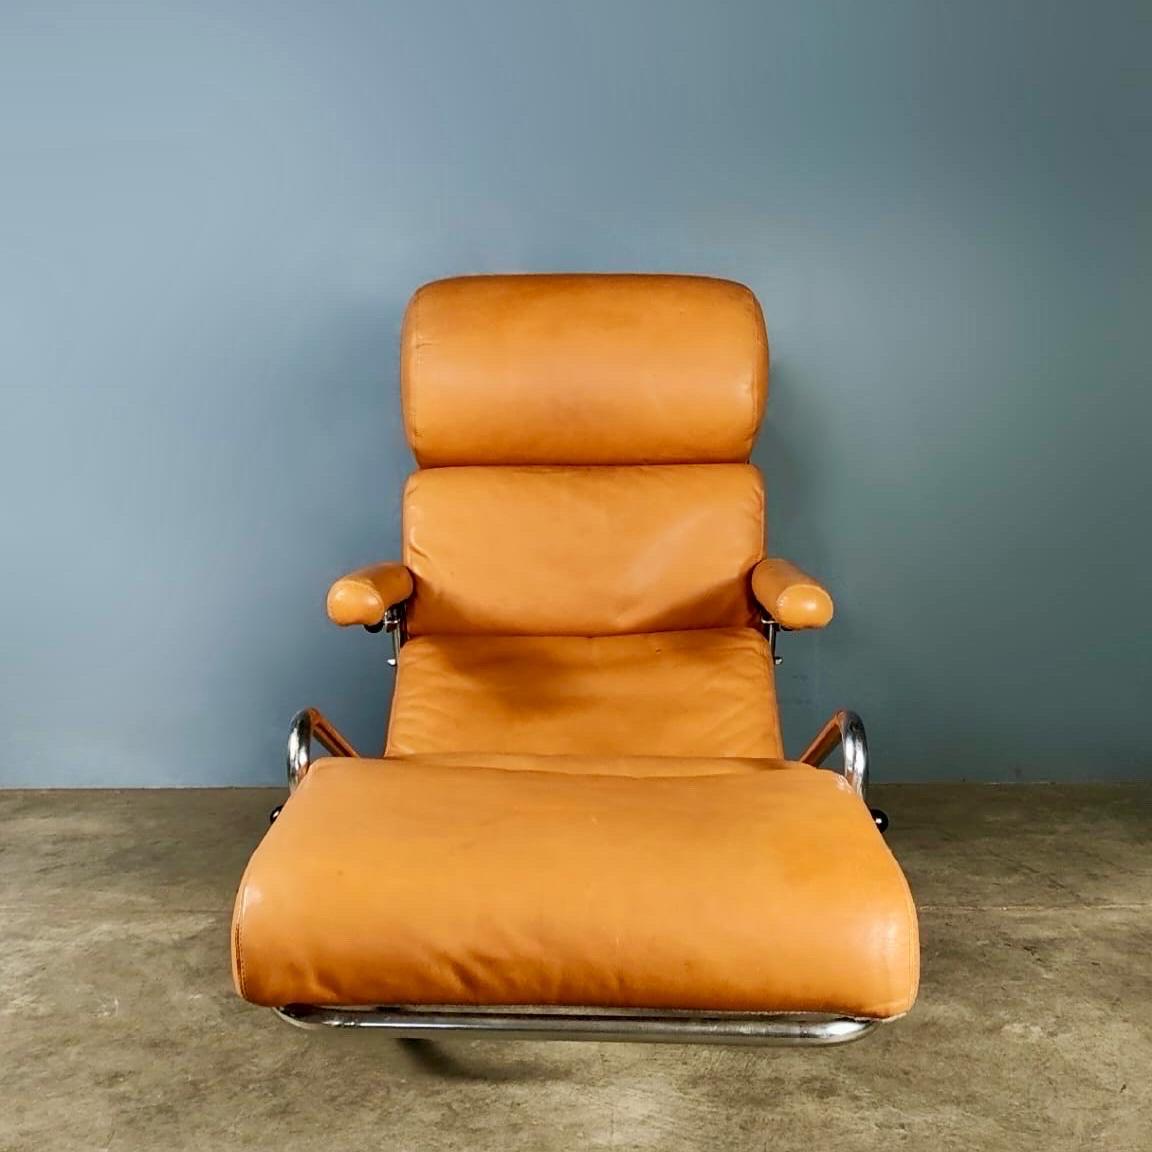 Inconnu Banmüller Lama Brown Leather French German Rocking Lounge Chair Chaise en vente